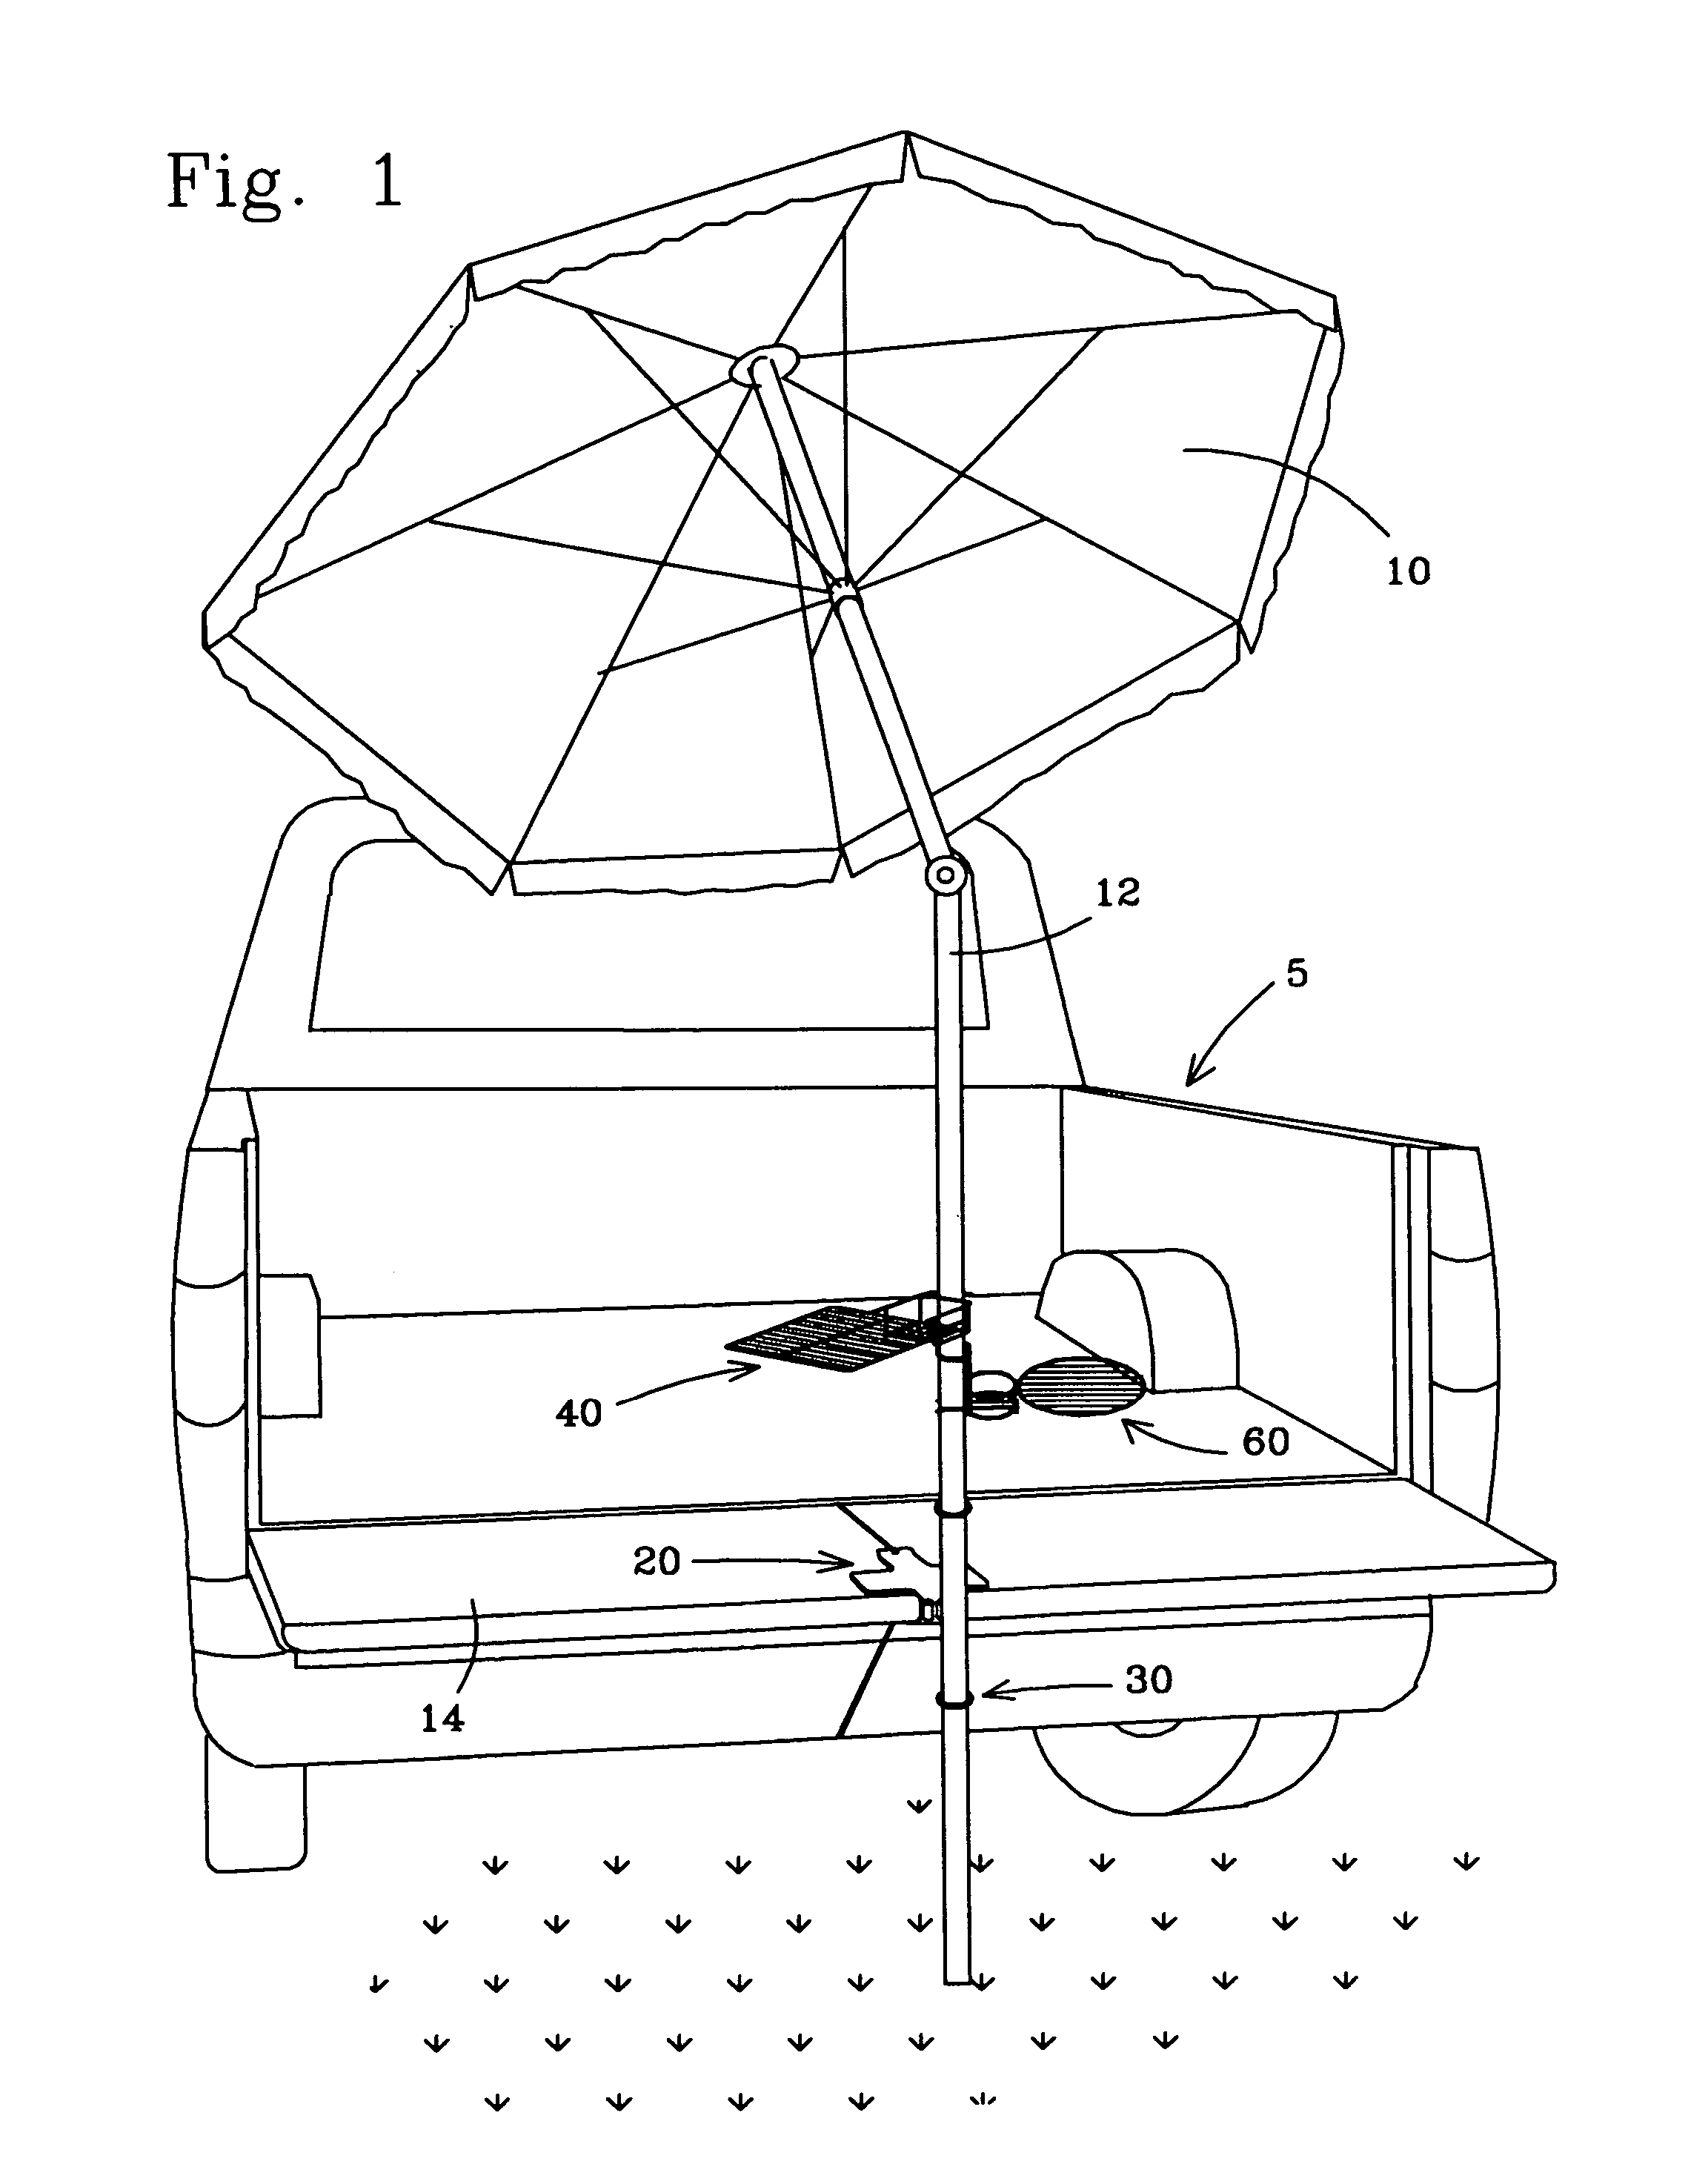 Umbrella support device and serving trays